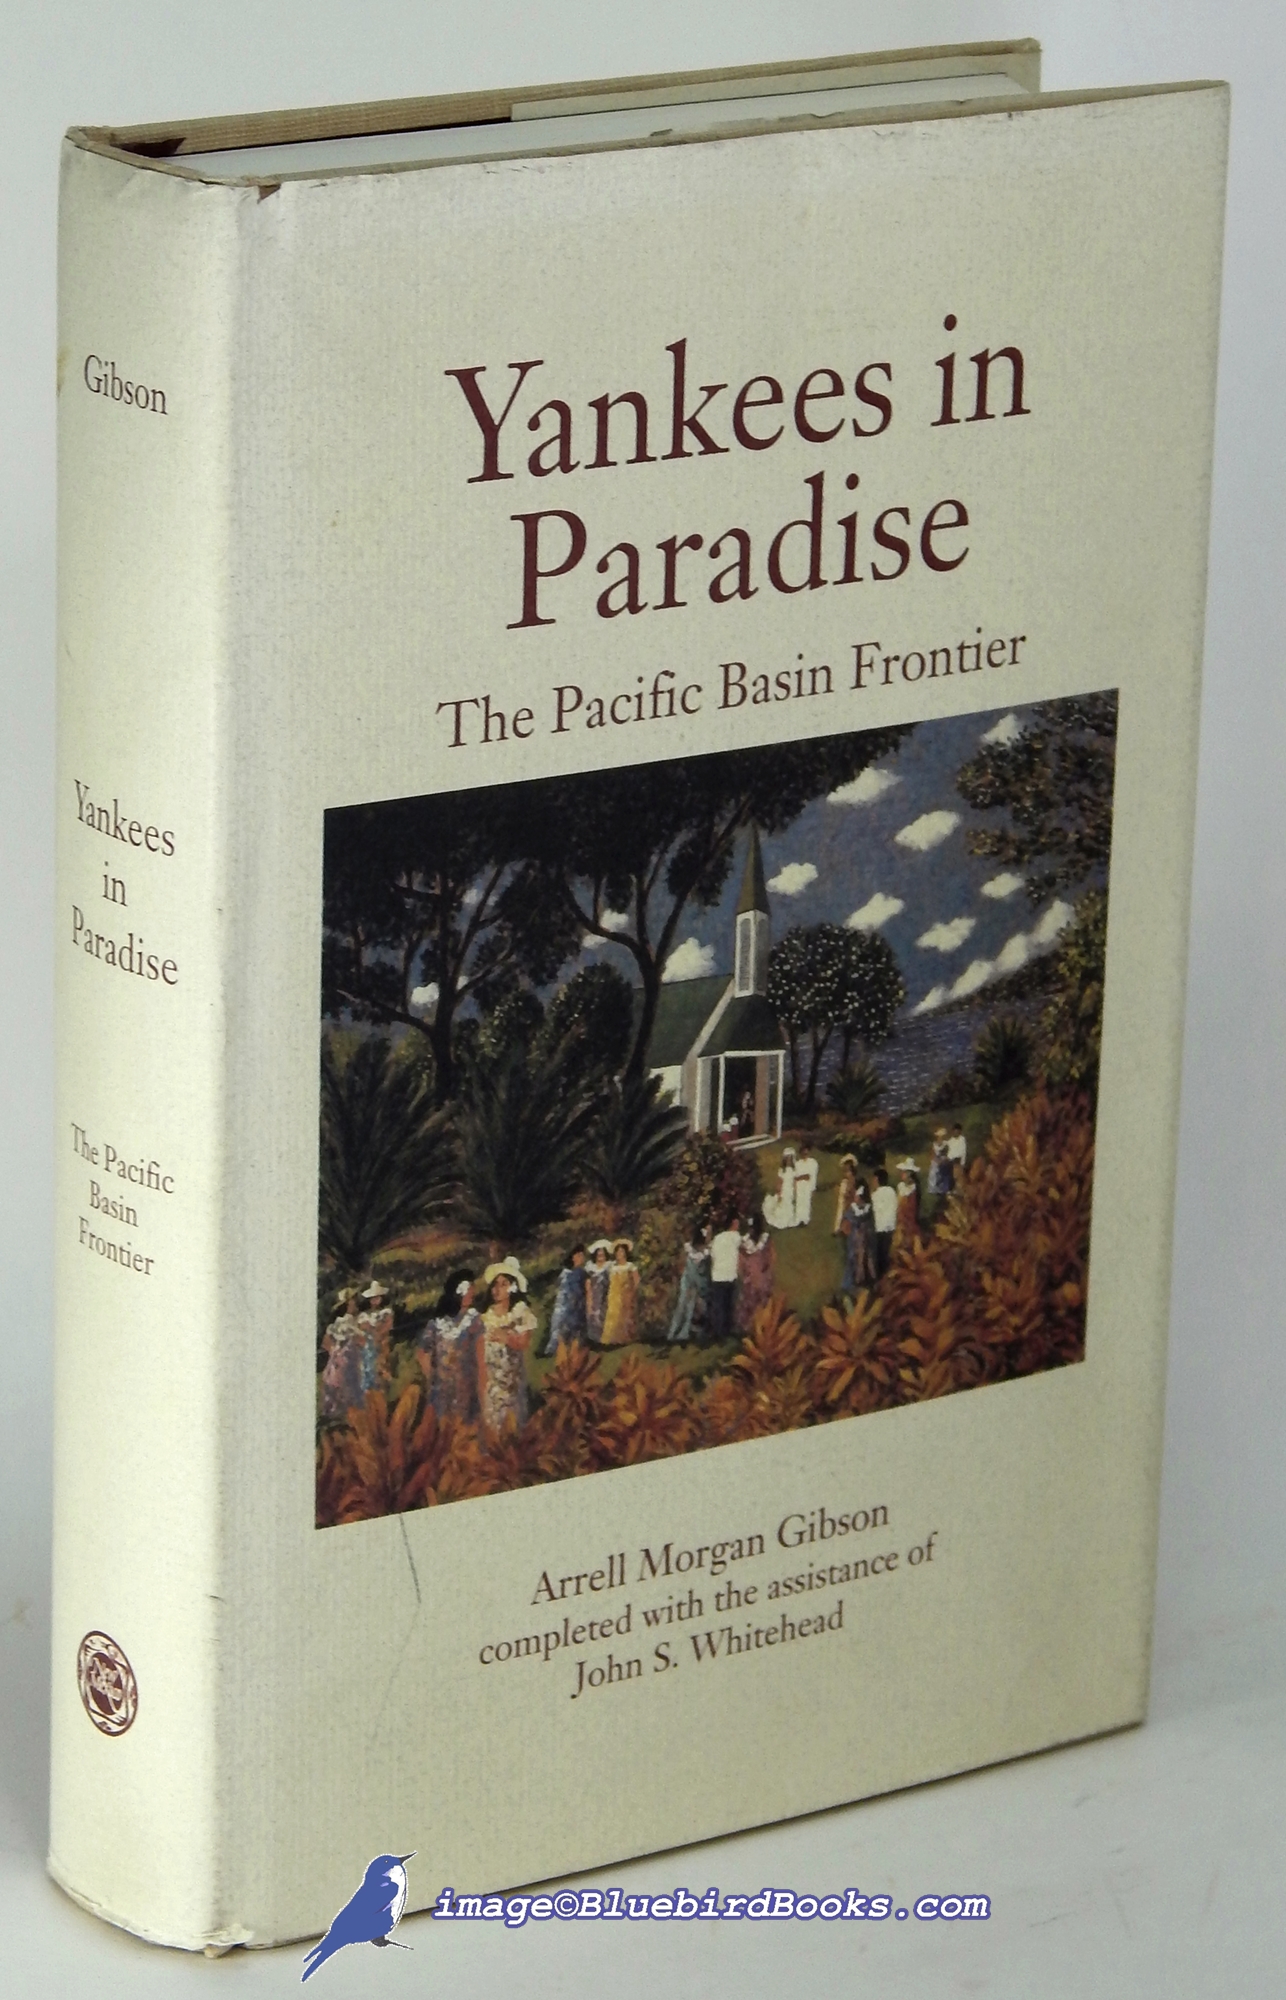 GIBSON, ARRELL MORGAN - Yankees in Paradise: The Pacific Basin Frontier (Histories of the American Frontier Series)